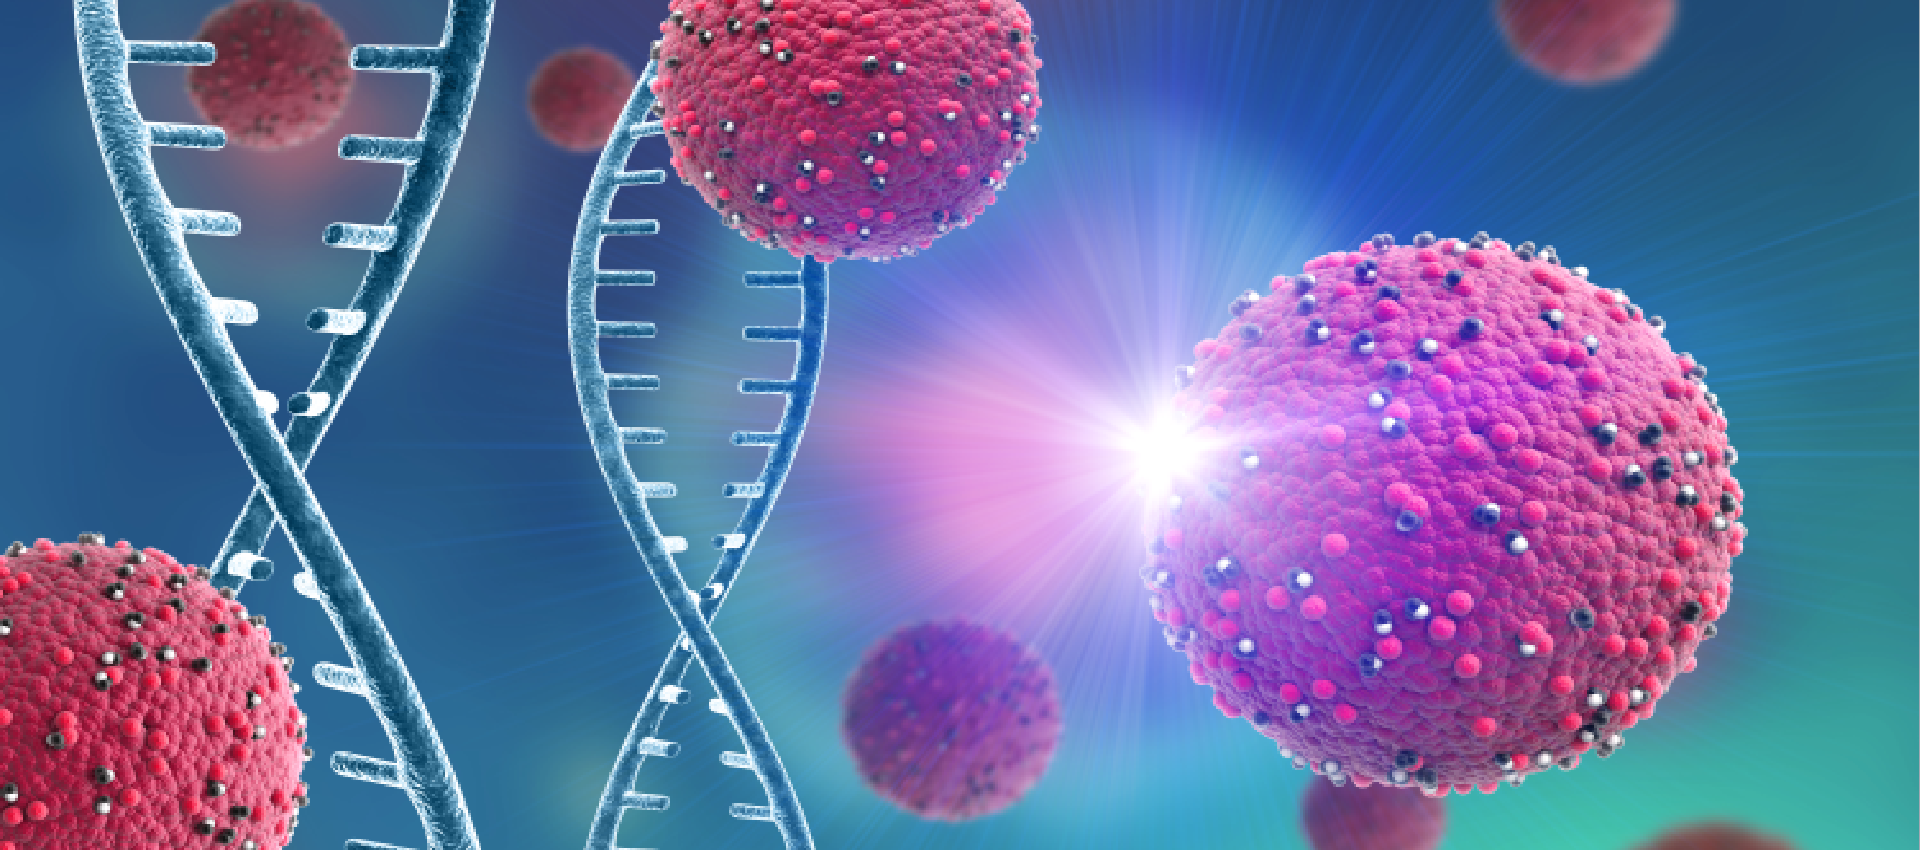 Digital illustration of pink viruses with surface spikes near a DNA strand, highlighting a board-certified orthopedic surgeon's research concept against a blue backdrop.